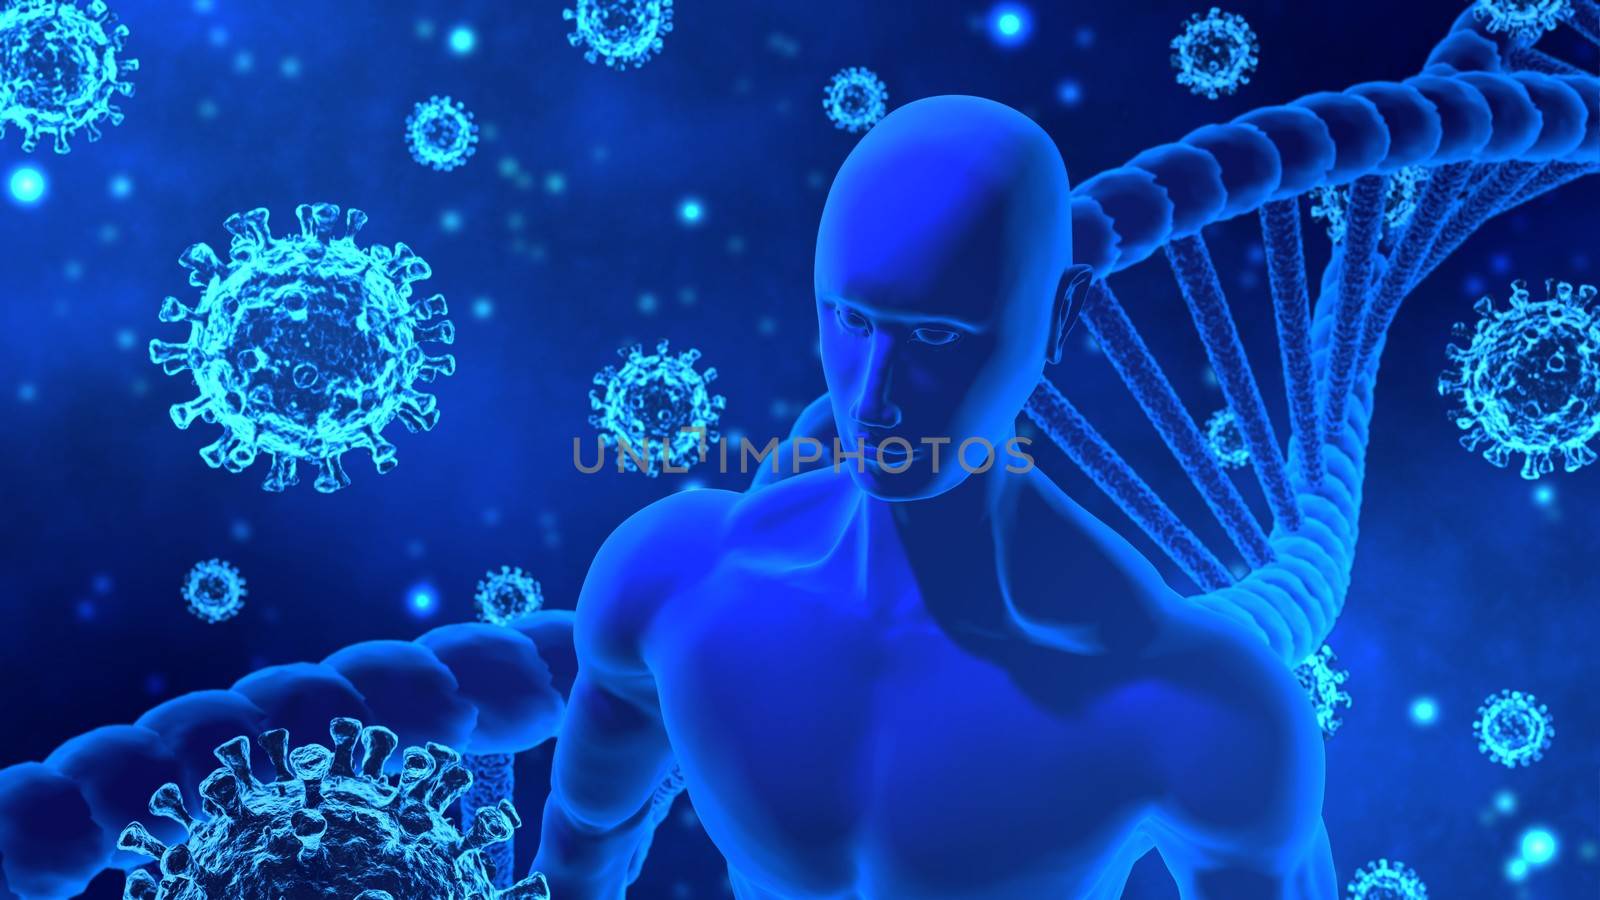 3D Rendering Virus/COVID-19, Human/AI Body and DNA Helix Model in Abstract Blue Background Still Image by ariya23156